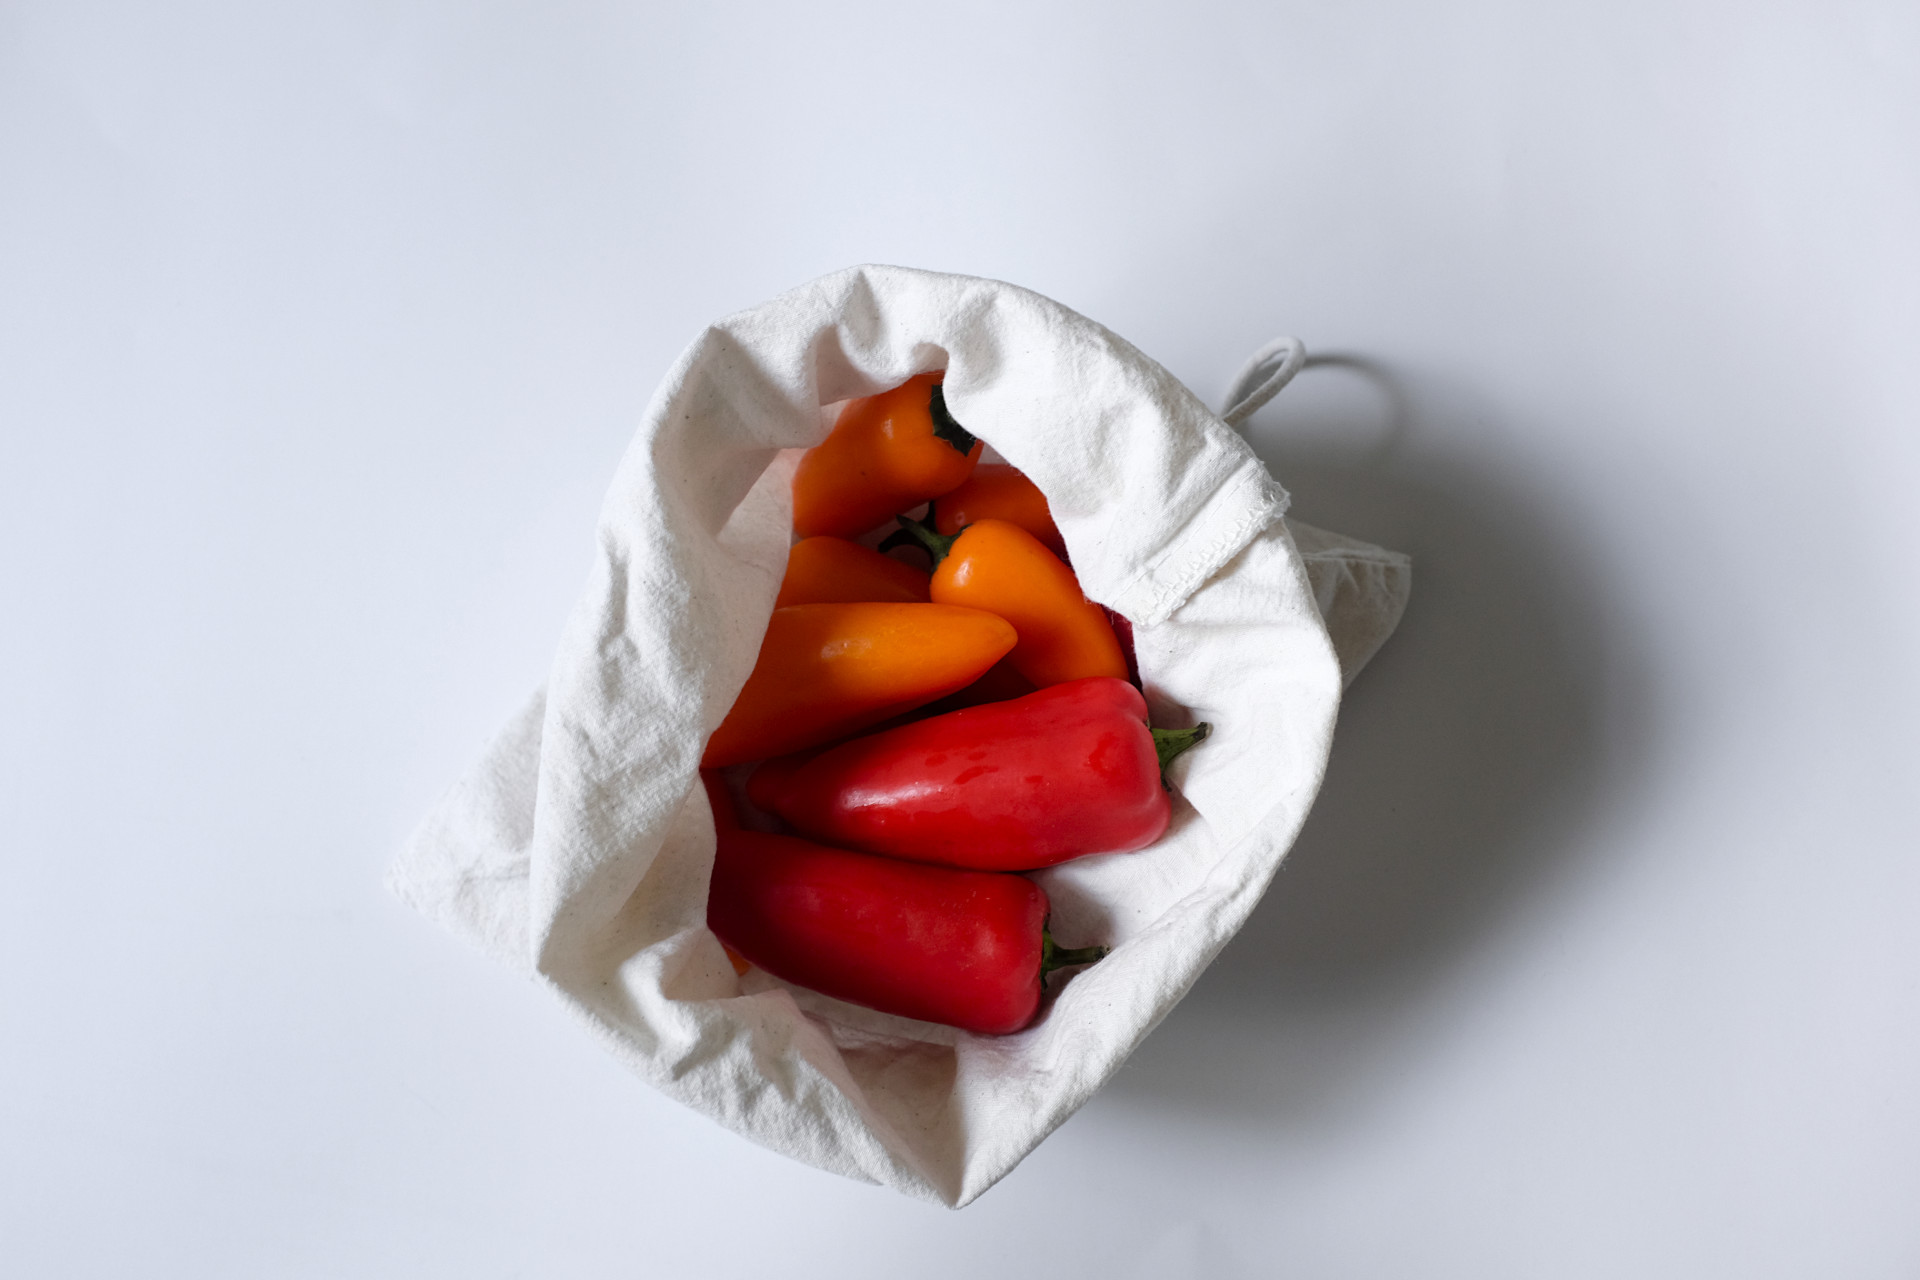 Red and orange mini sweet peppers sit in a cloth drawstring bag on a white surface